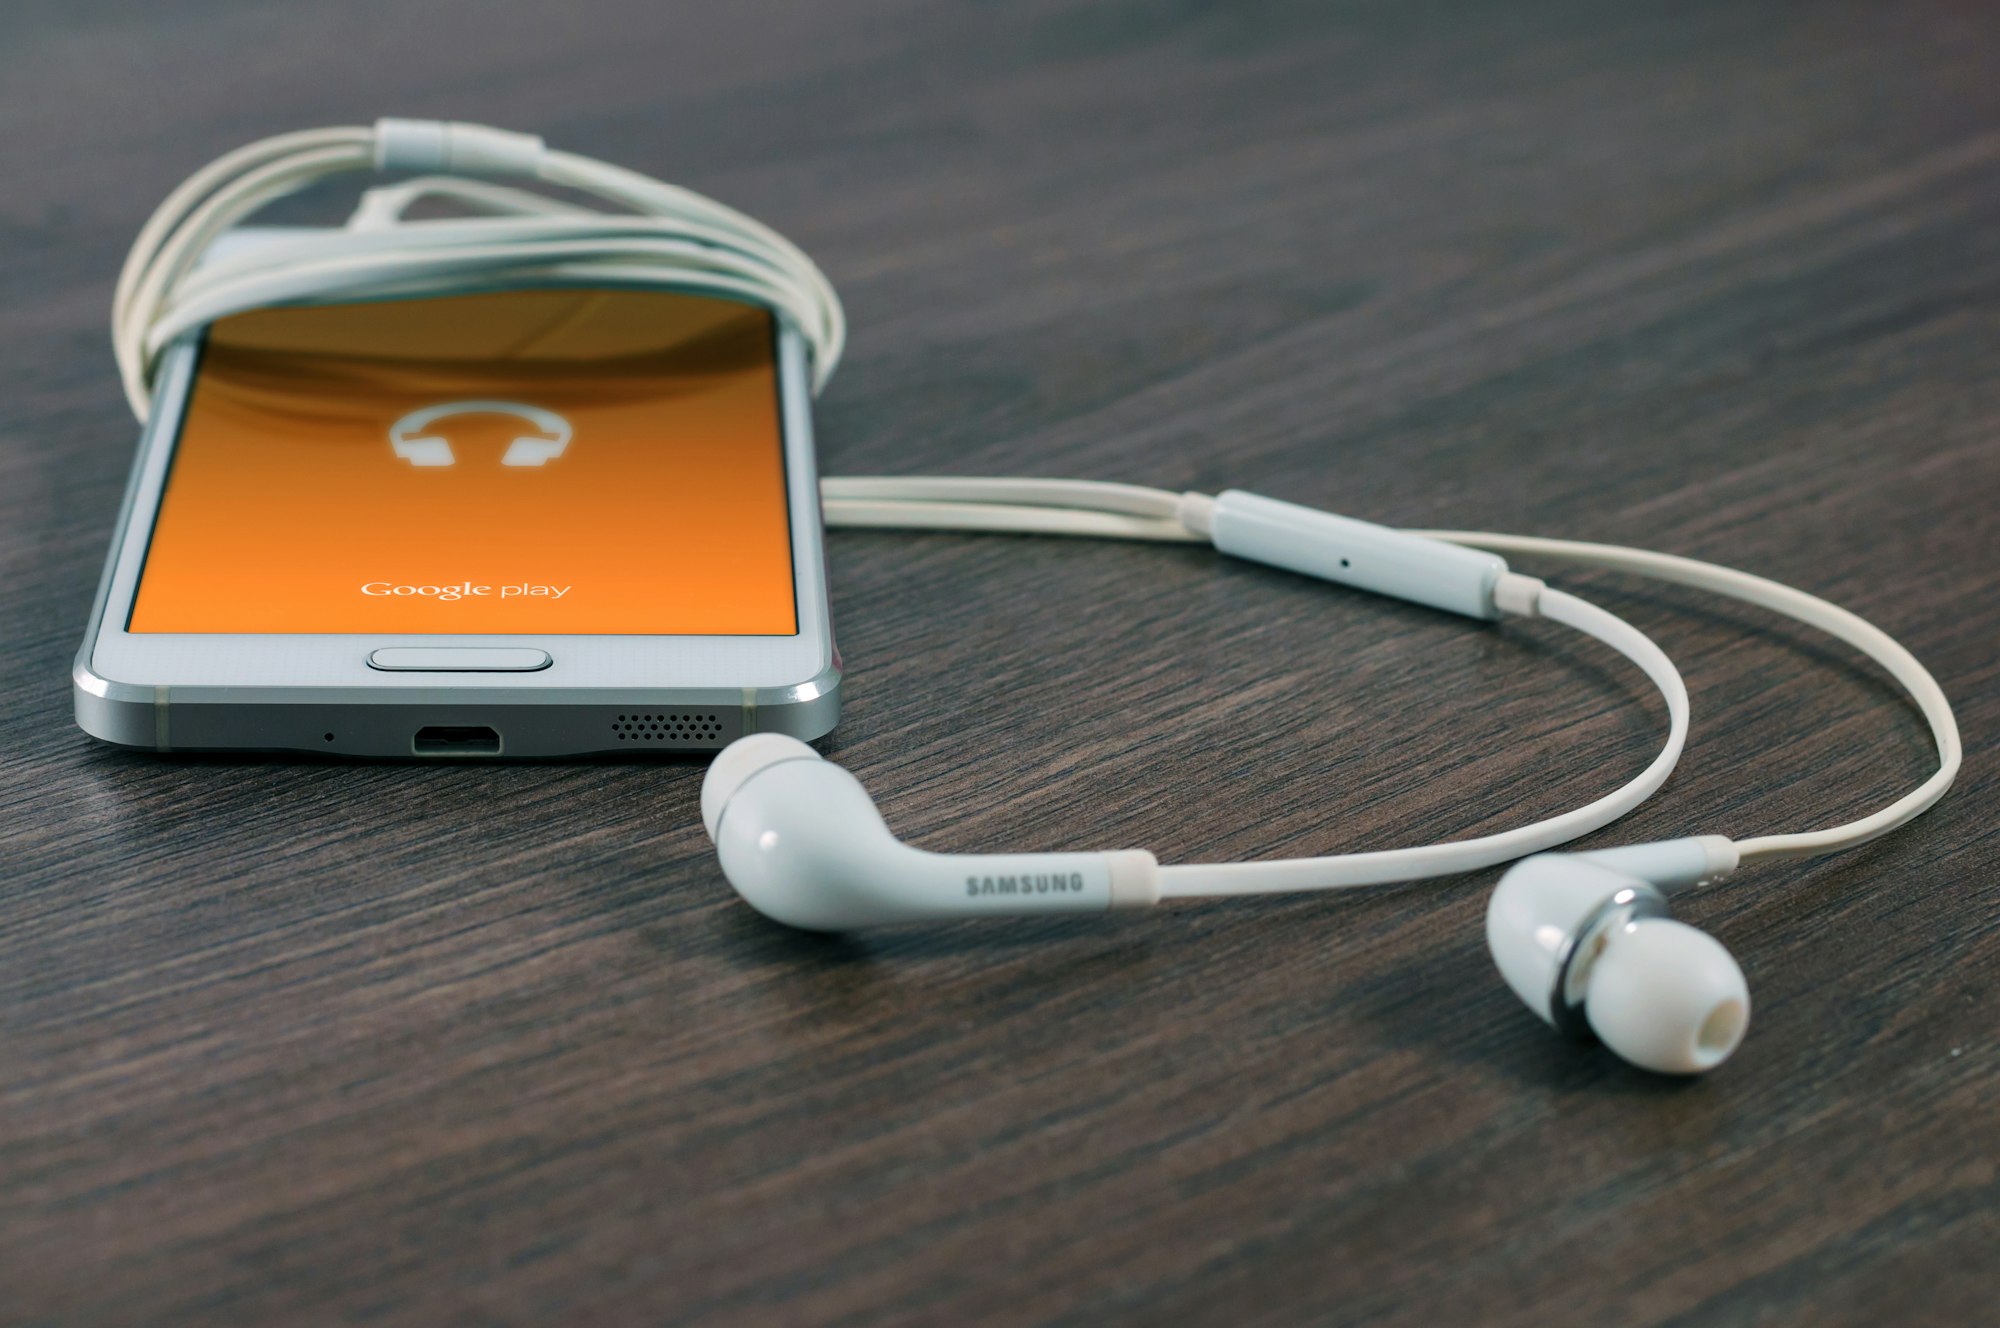 What exactly is the right price for music streaming?